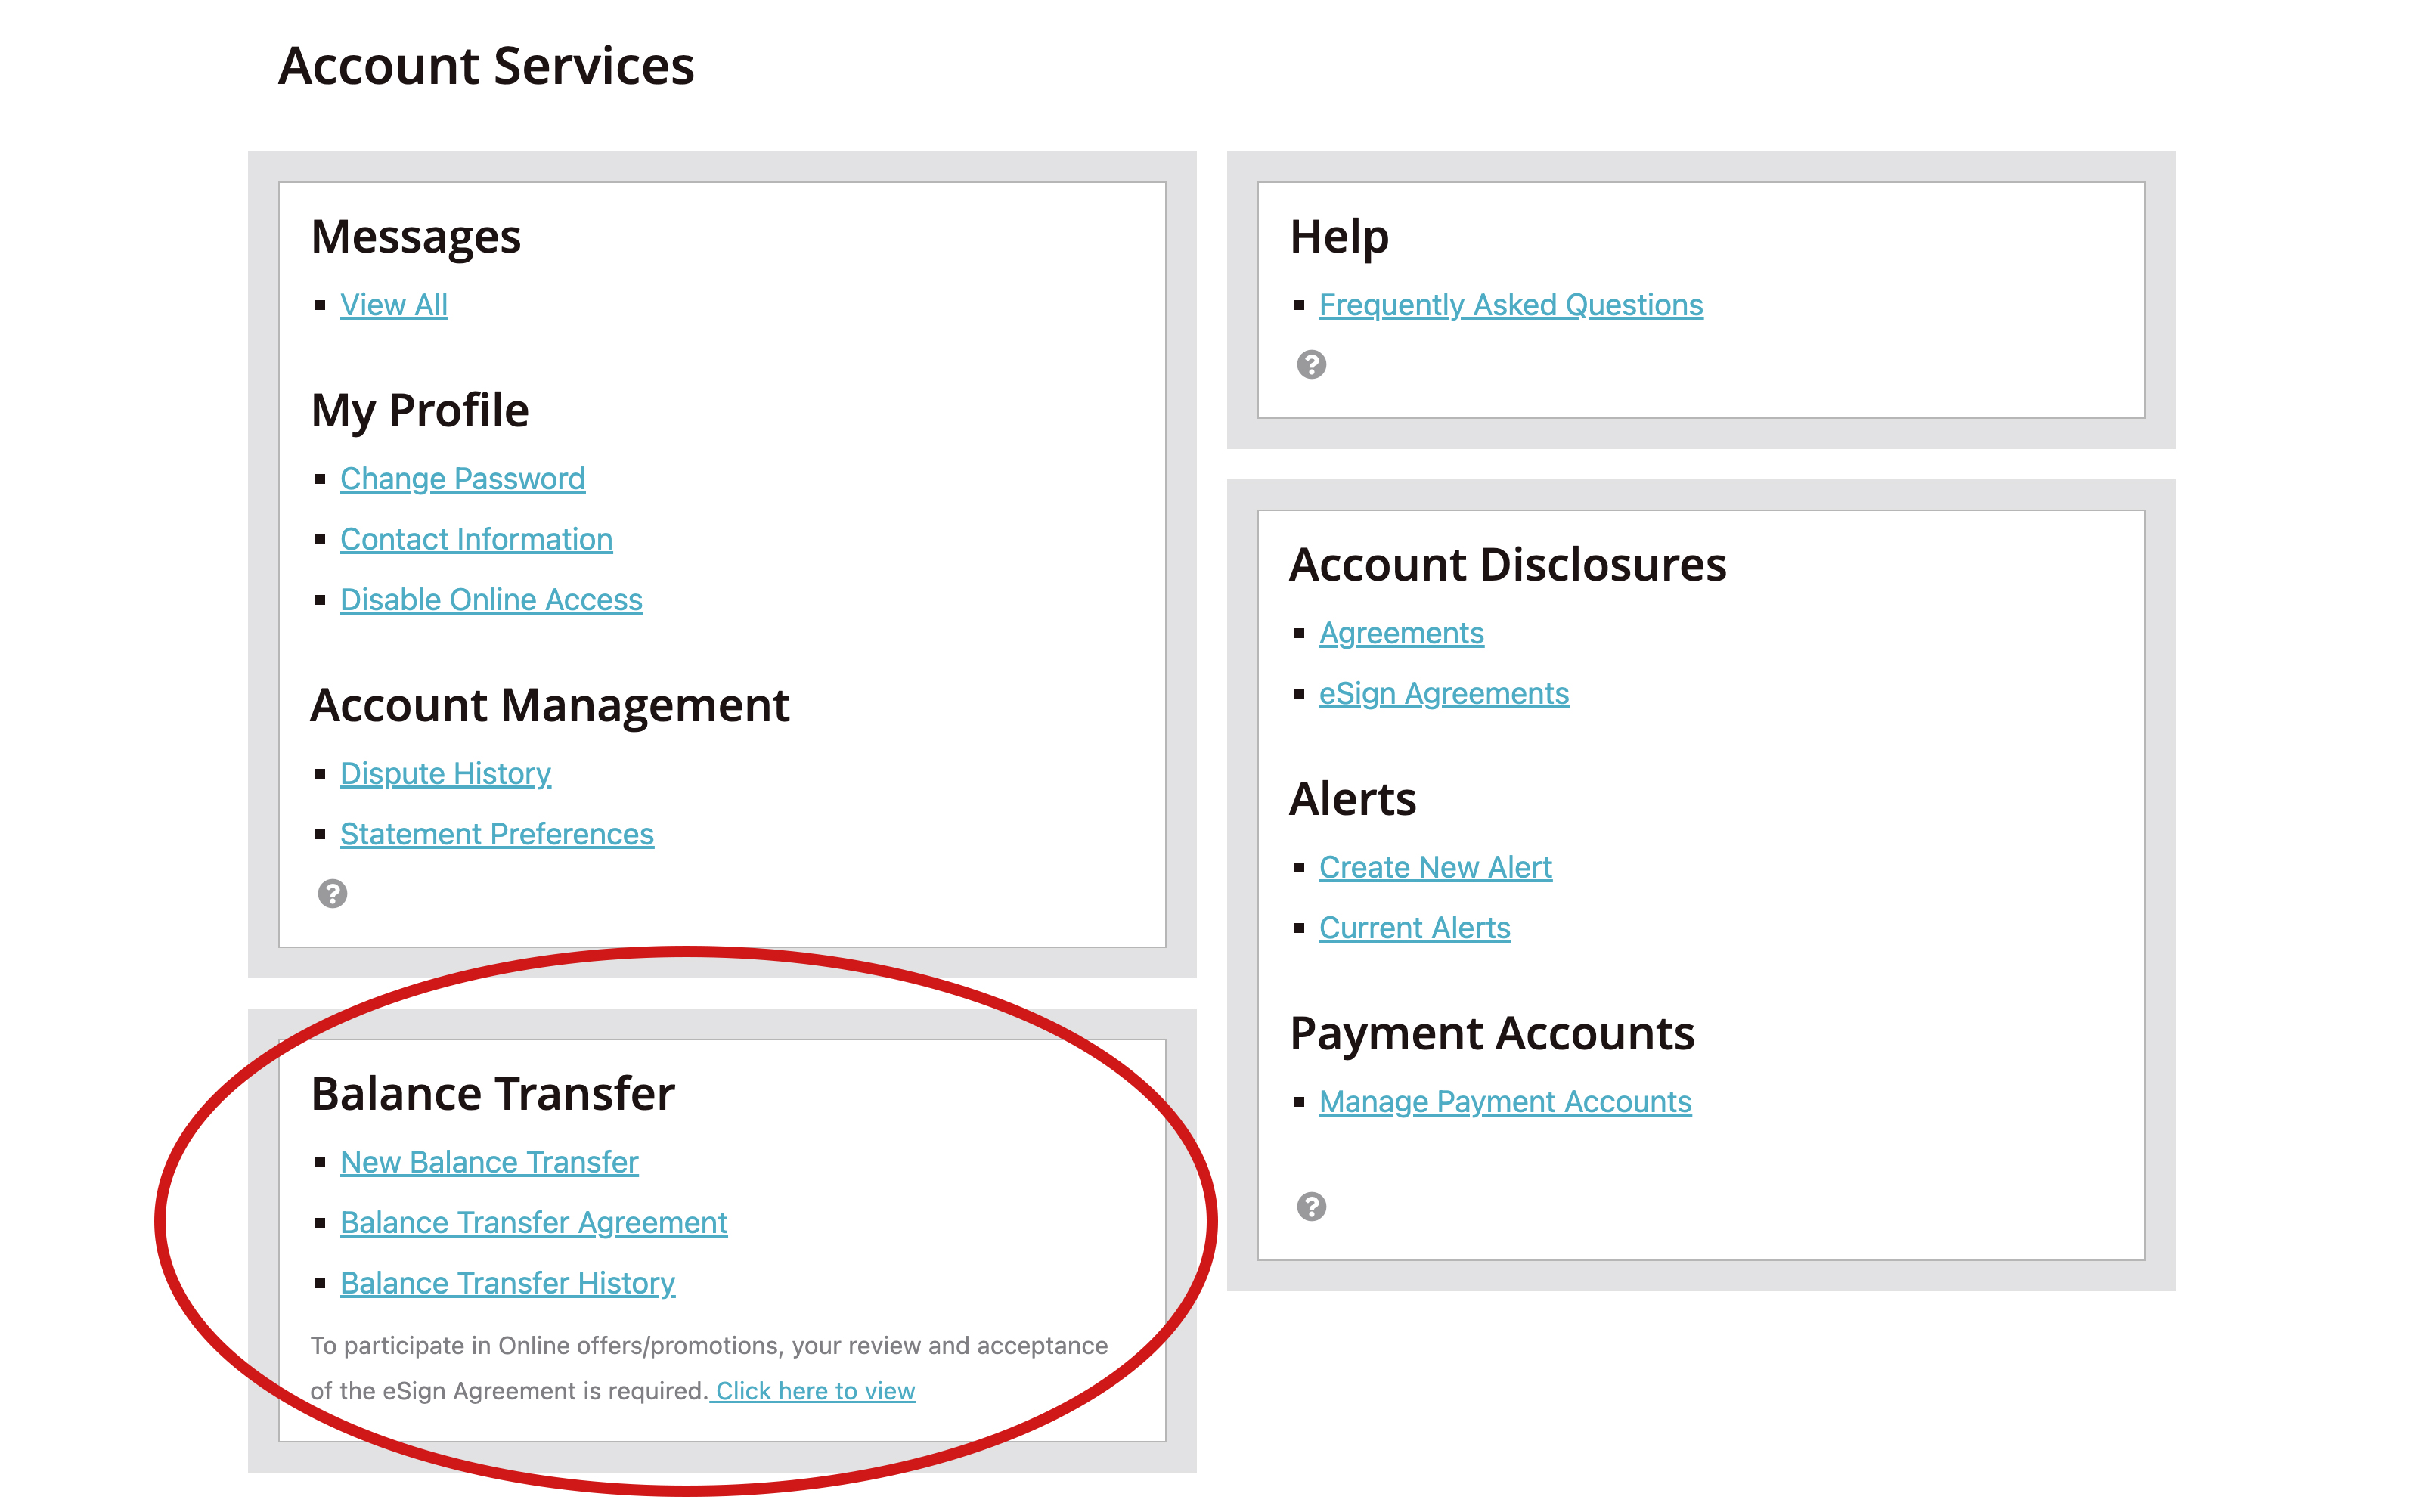 Balance transfer areas on account services page